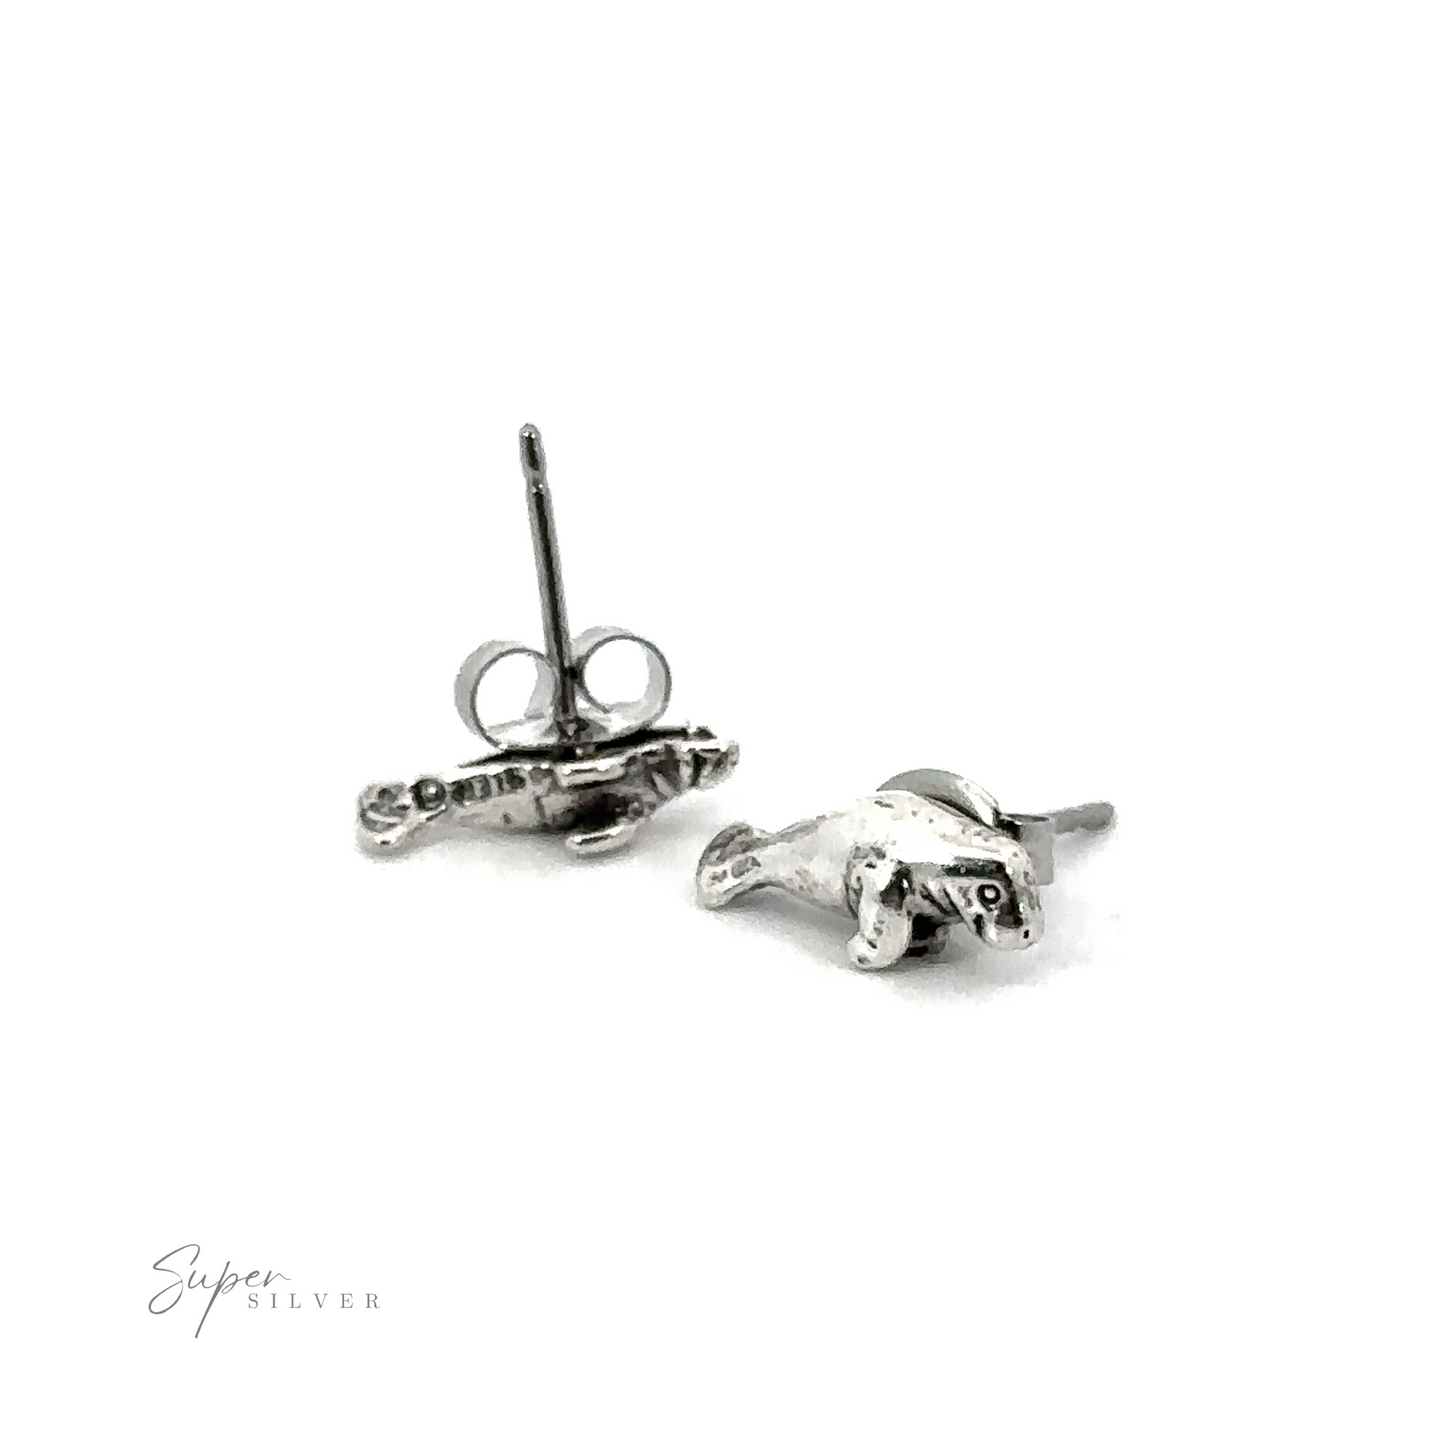 A pair of Manatee Studs with a bear on them, perfect for animal lovers.